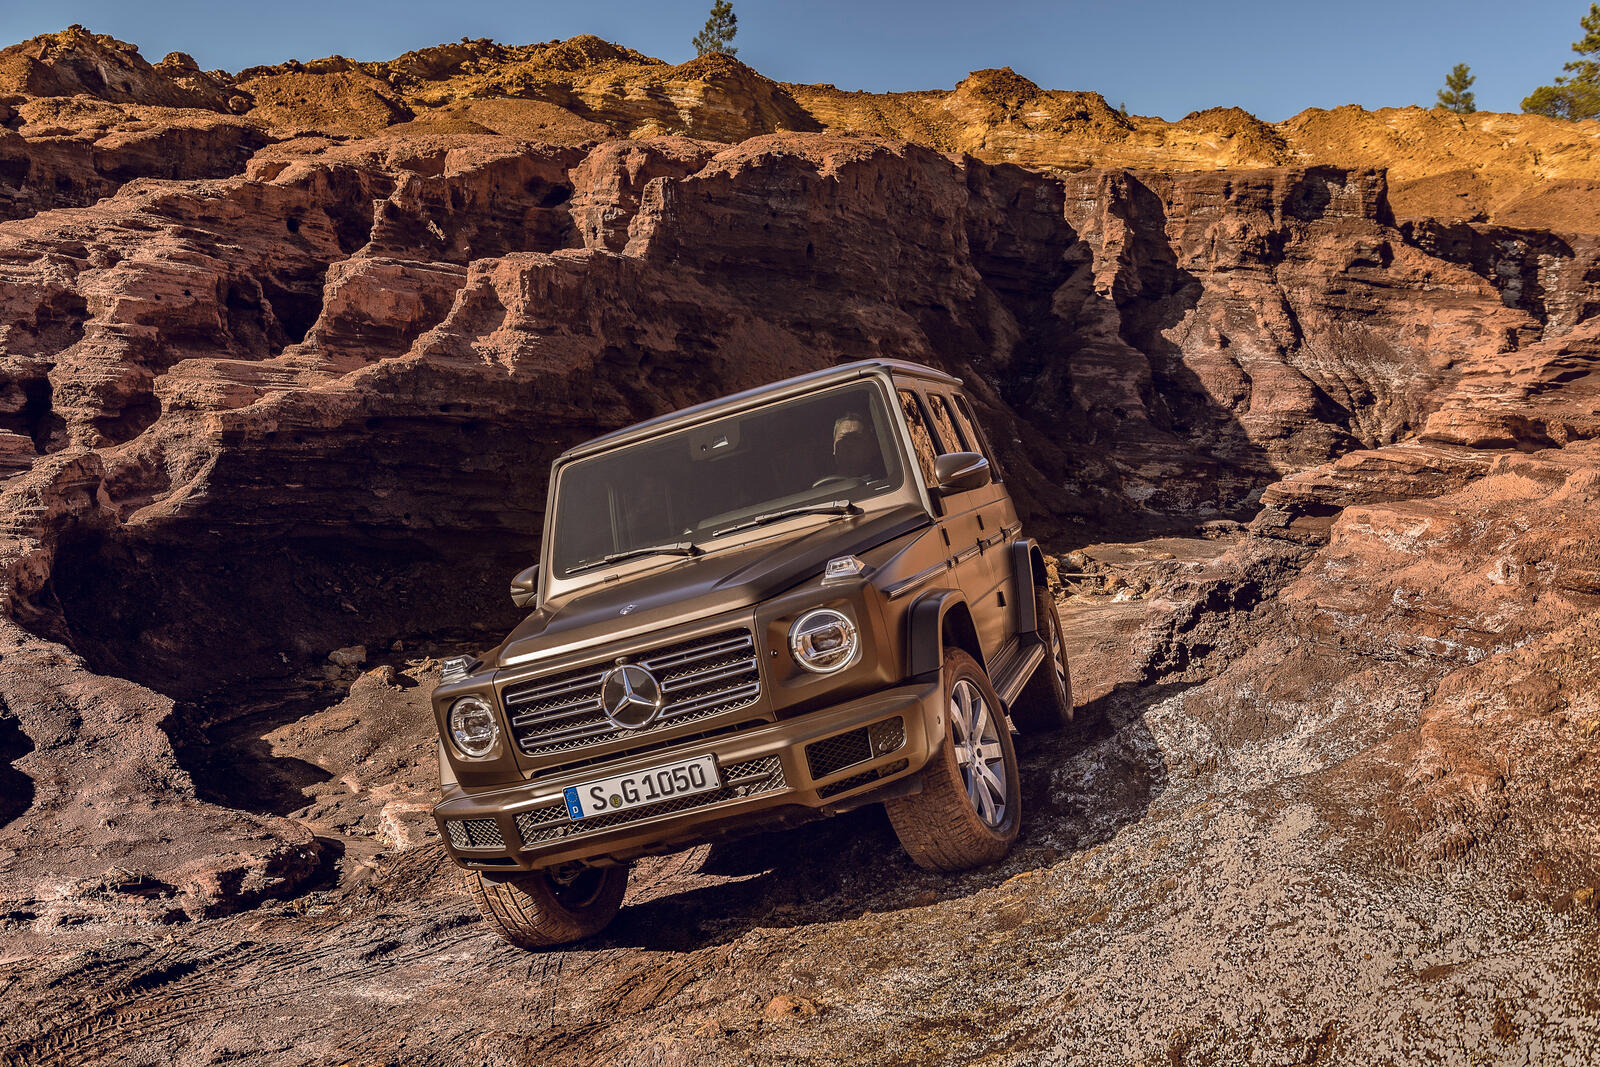 Wallpapers off-road 2019 cars Mercedes on the desktop